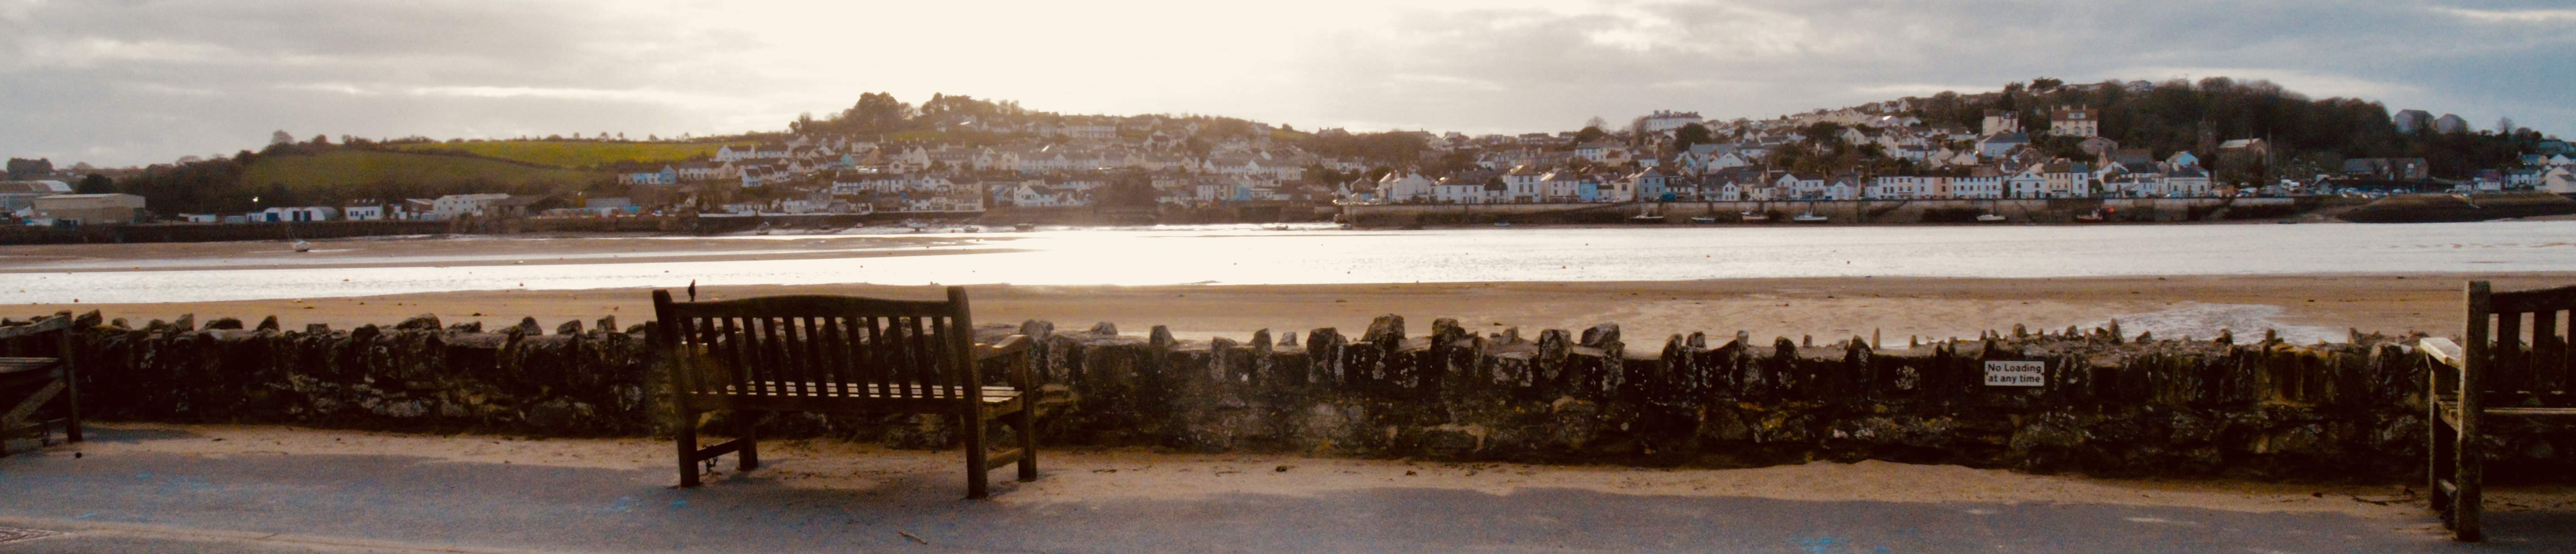 A bench dedicated to my father and brother-in-law in Instow, Devon, UK